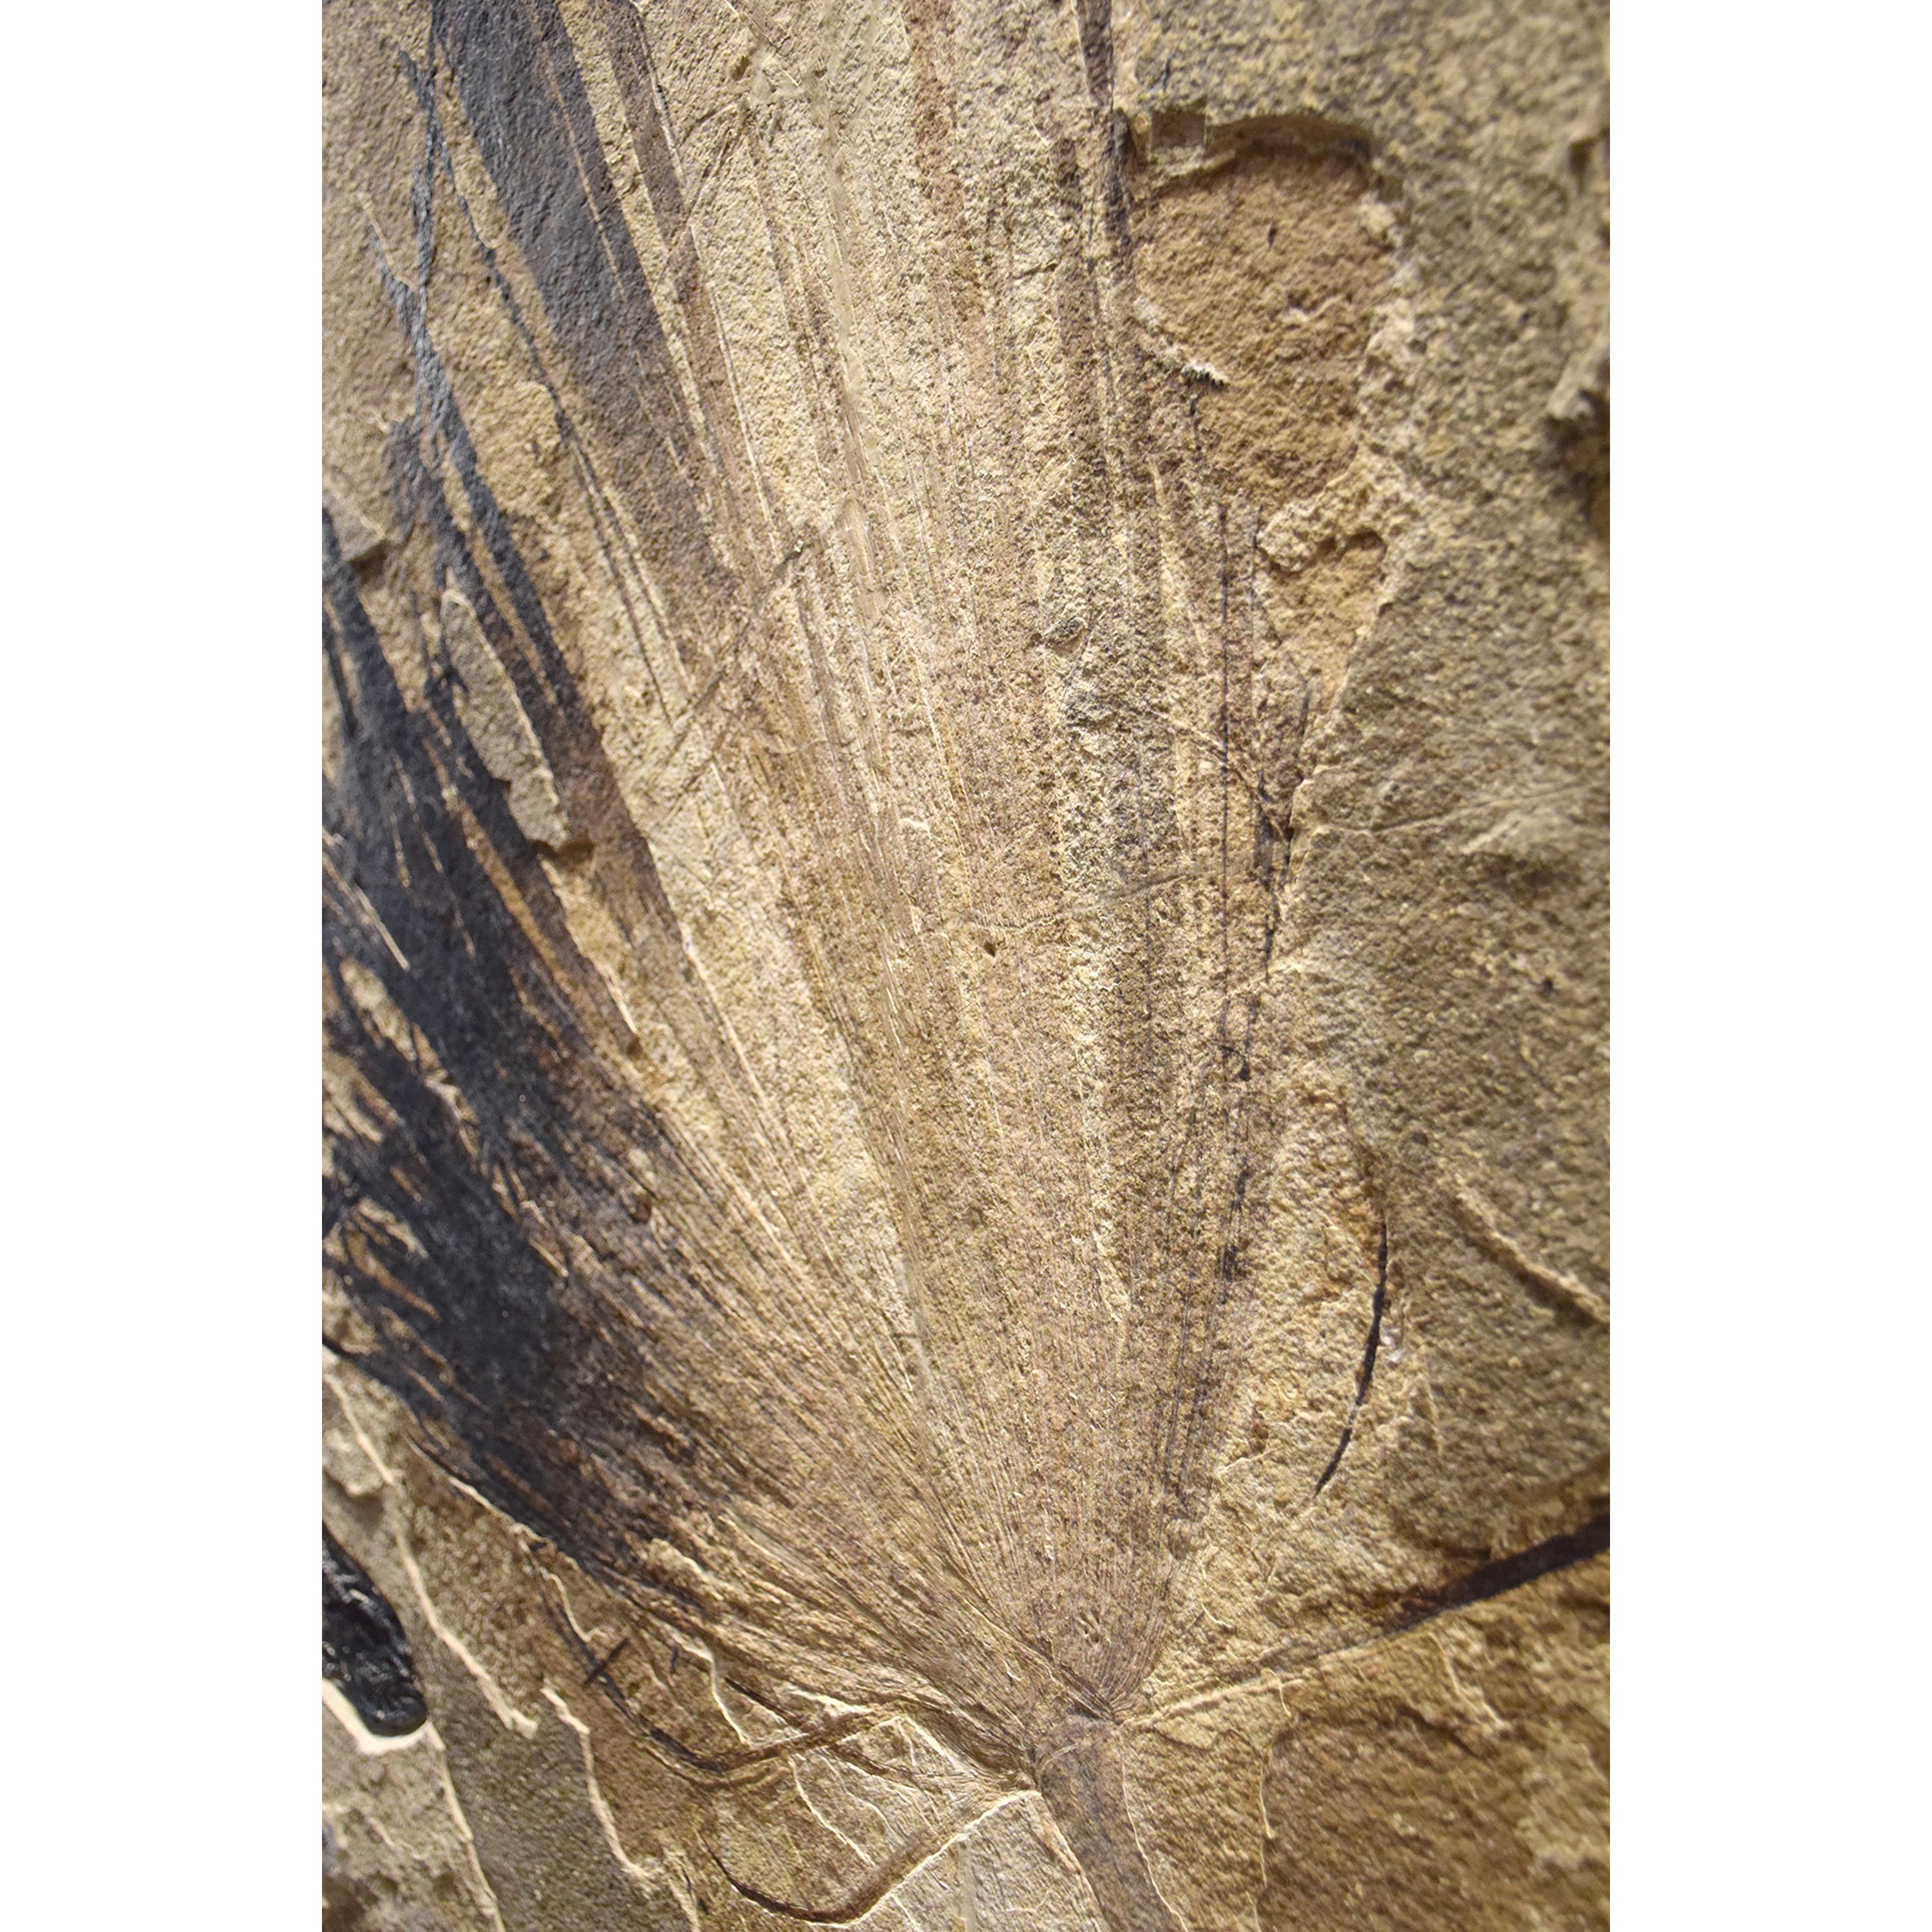 Organic Material 50 Million Year Old Eocene Era Fossil Palm Frond in Stone, from Wyoming